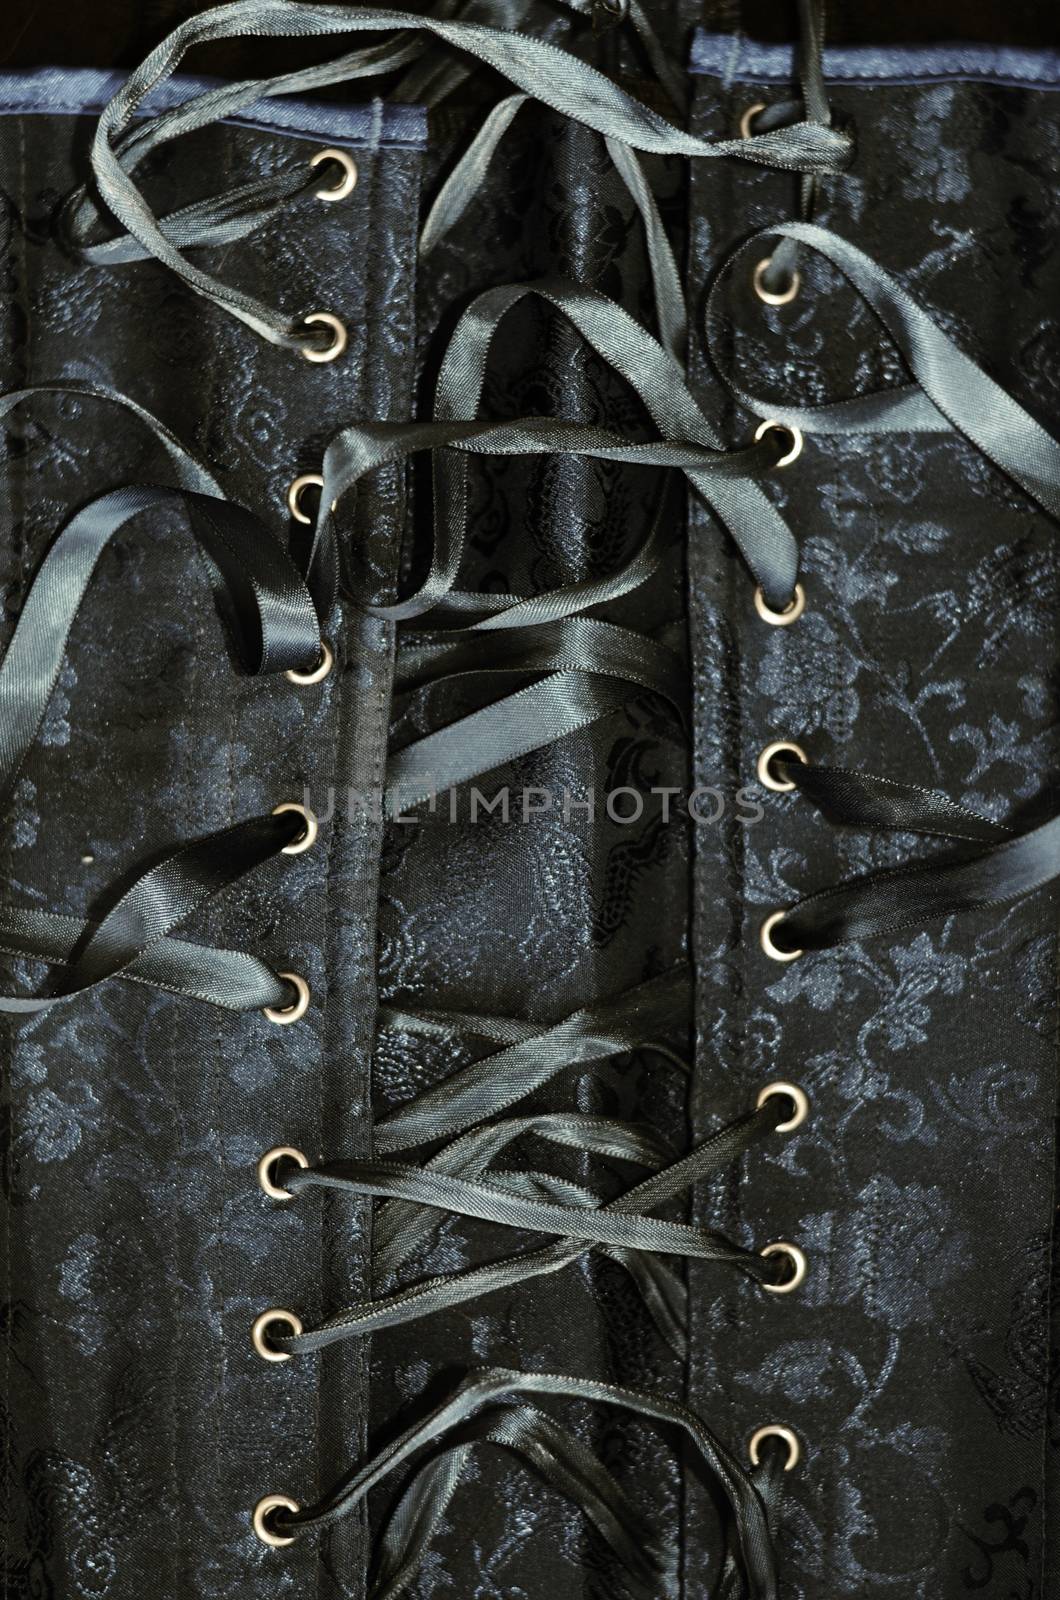 corset lacing detail by sarkao